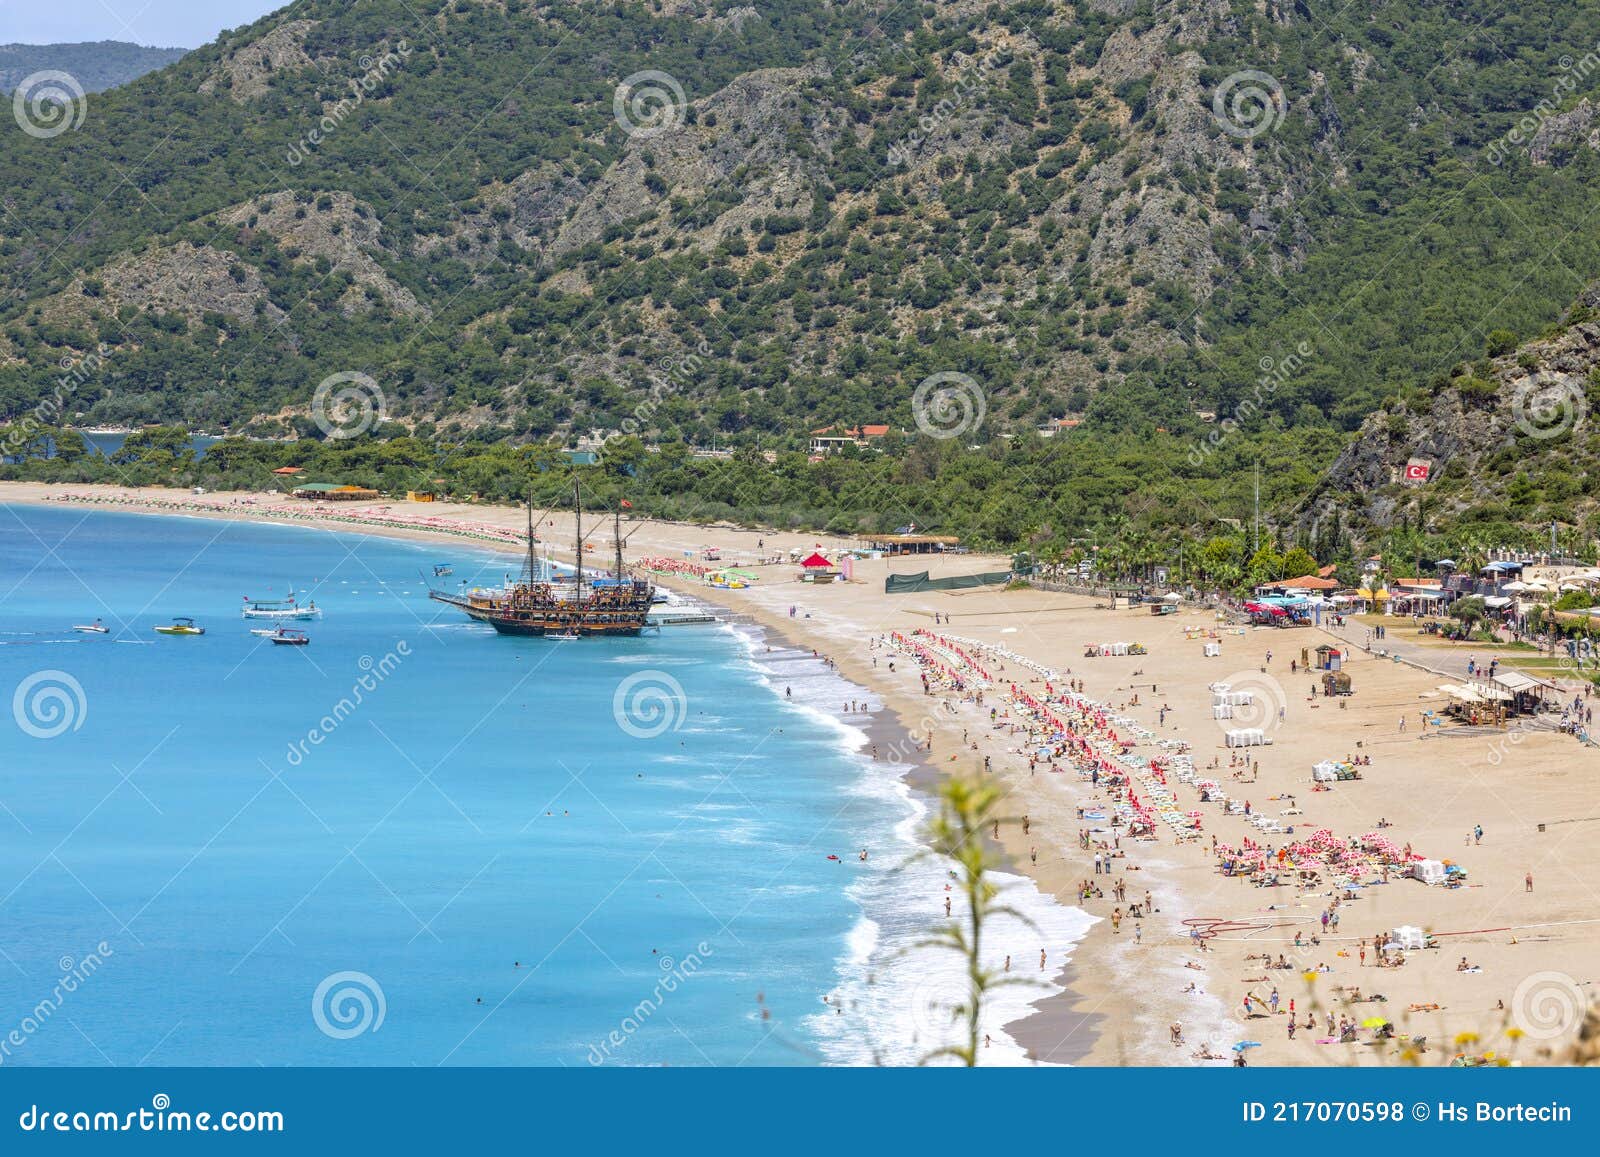 Wonderful Cove And Turquoise Waters Will Give You A Great Experience Oludeniz Fethiye Mugla